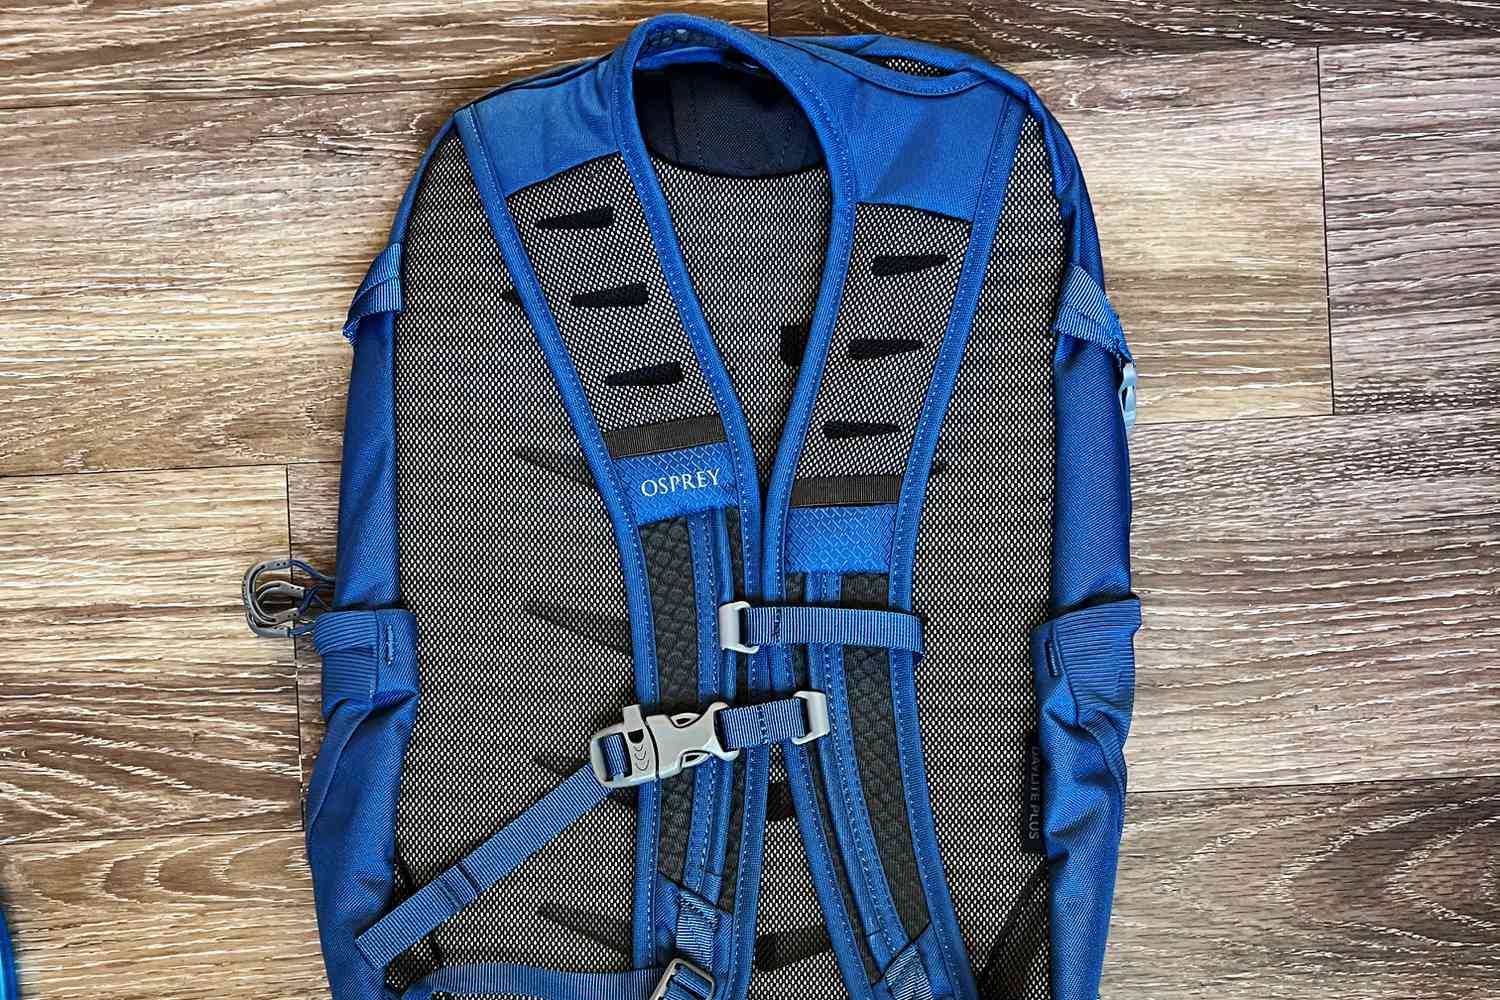 Back view of the Osprey Daylite Plus